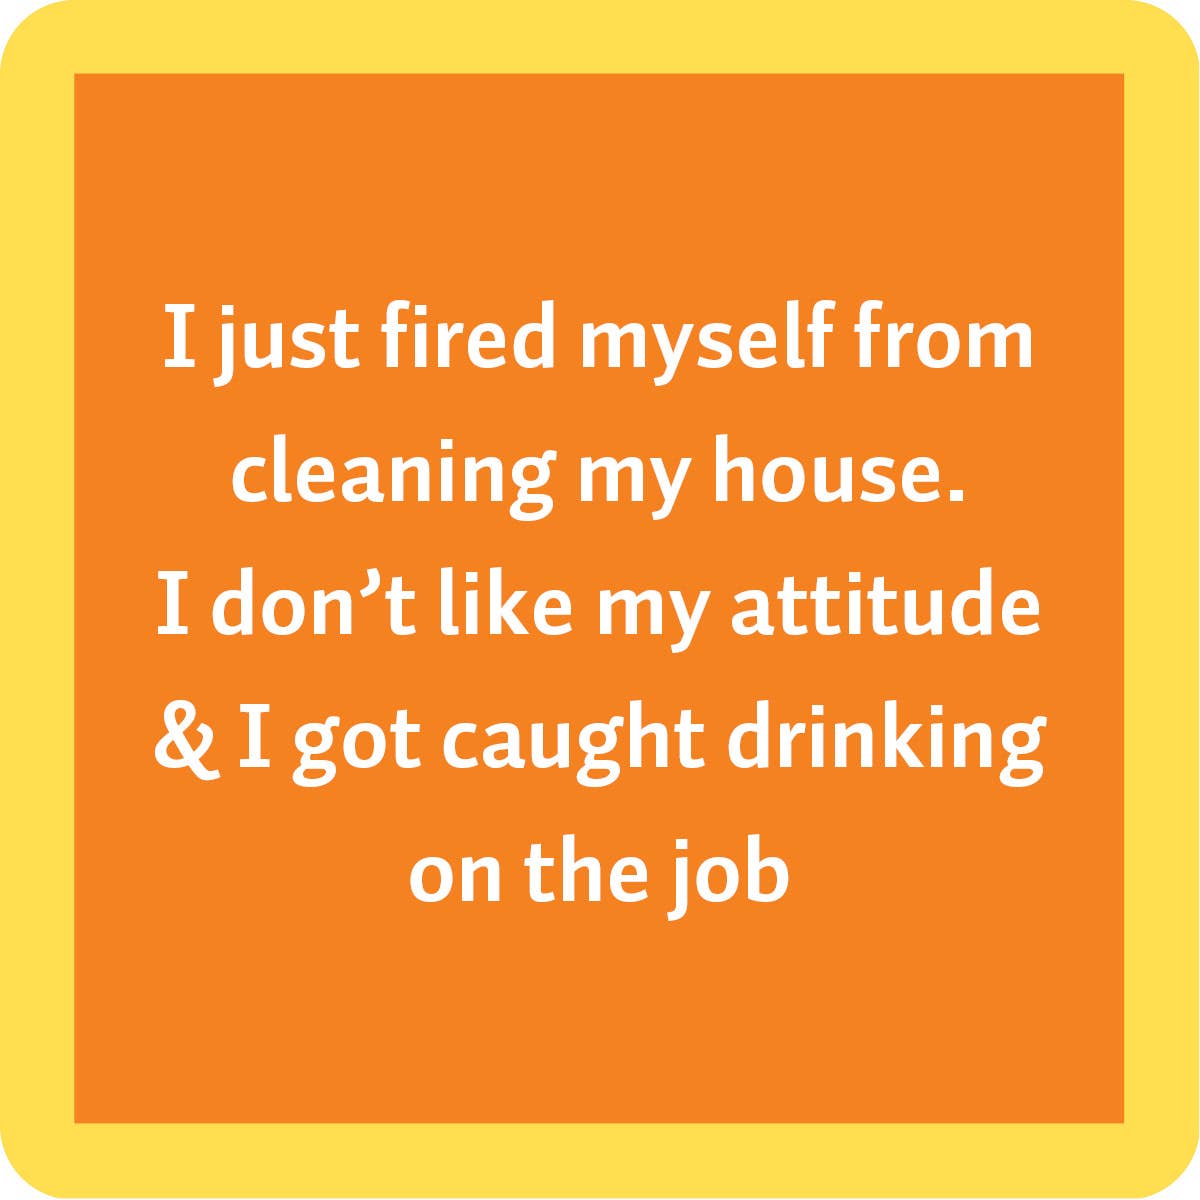 Pictured is a orange and yellow coaster made out of resin on the coaster the coaster says “I just fired myself from cleaning my house. I don't like my attitude and got caught drinking on the job.”  